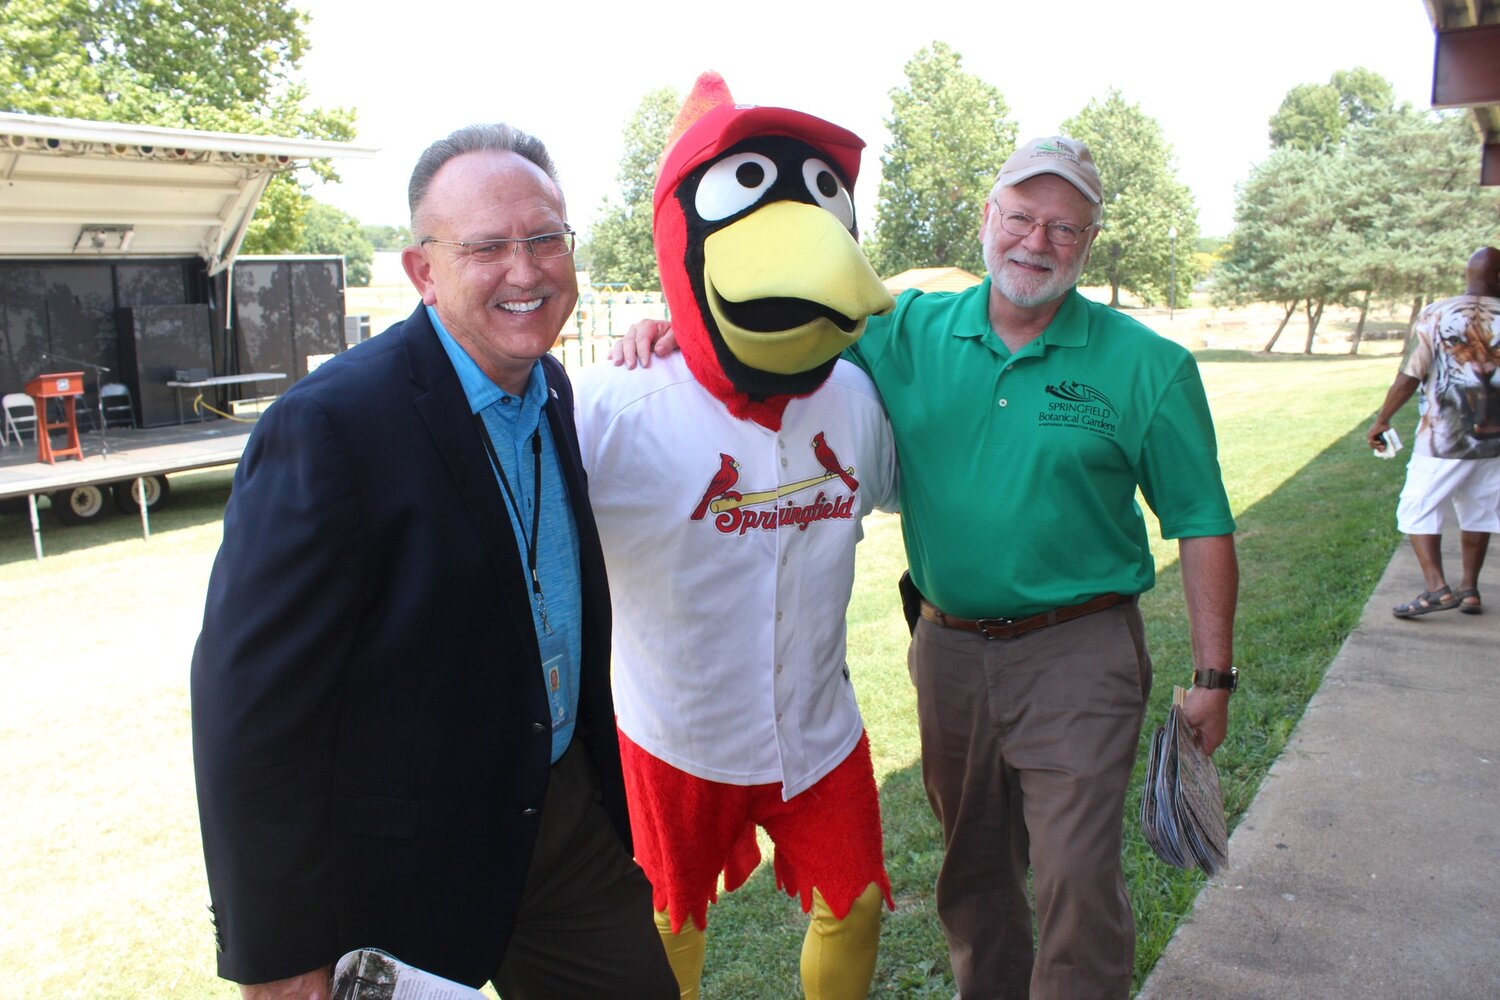 Bob Belote, left, is pictured with Louie, the Springfield Cardinals' mascot, and Assistant Parks Director Miles Park.